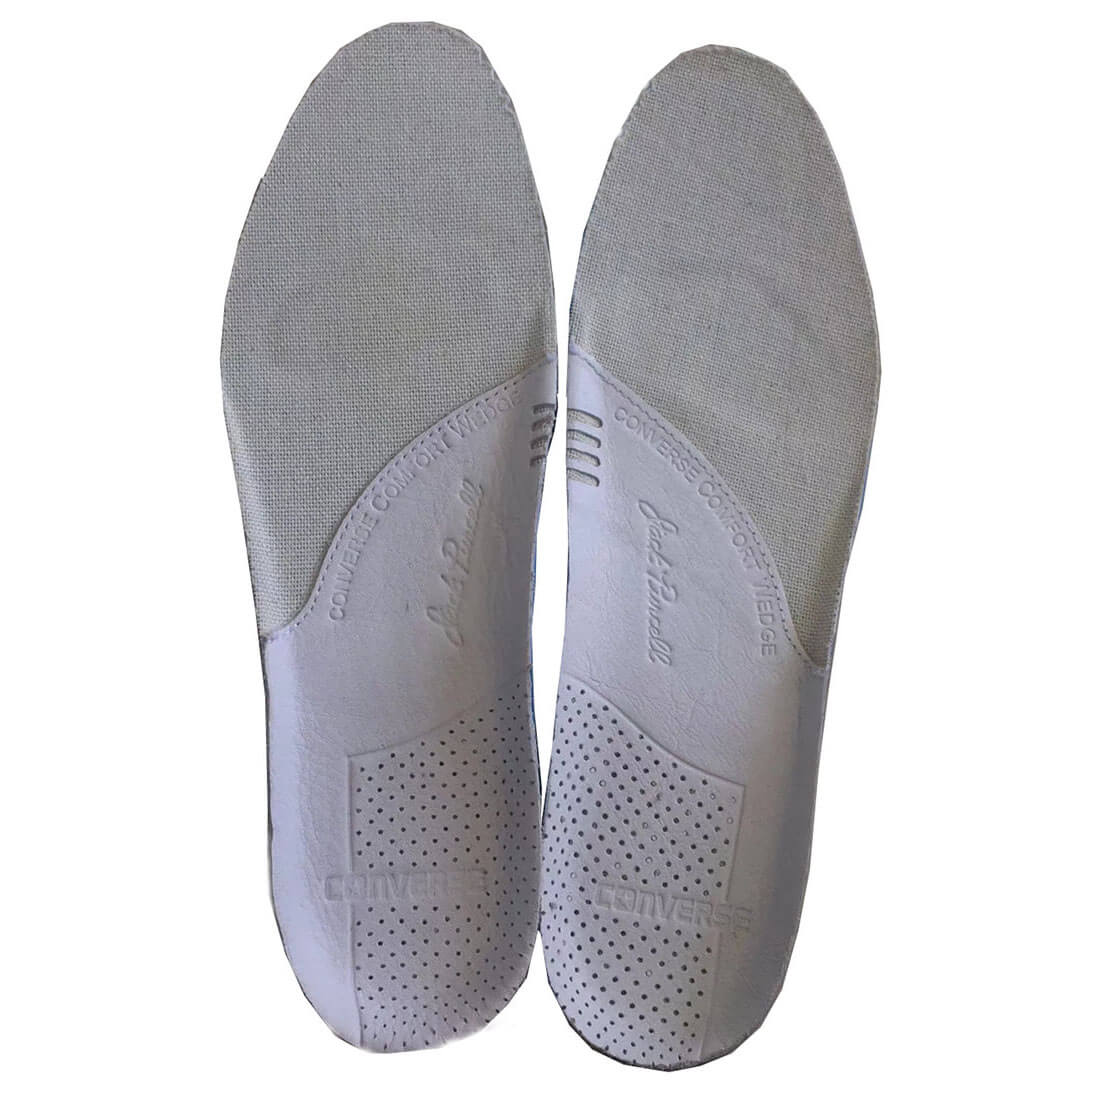 Replacement Jack Purcell 1970S CONVERSE COMFORT WEDGE ZOOM Ortholite Insoles